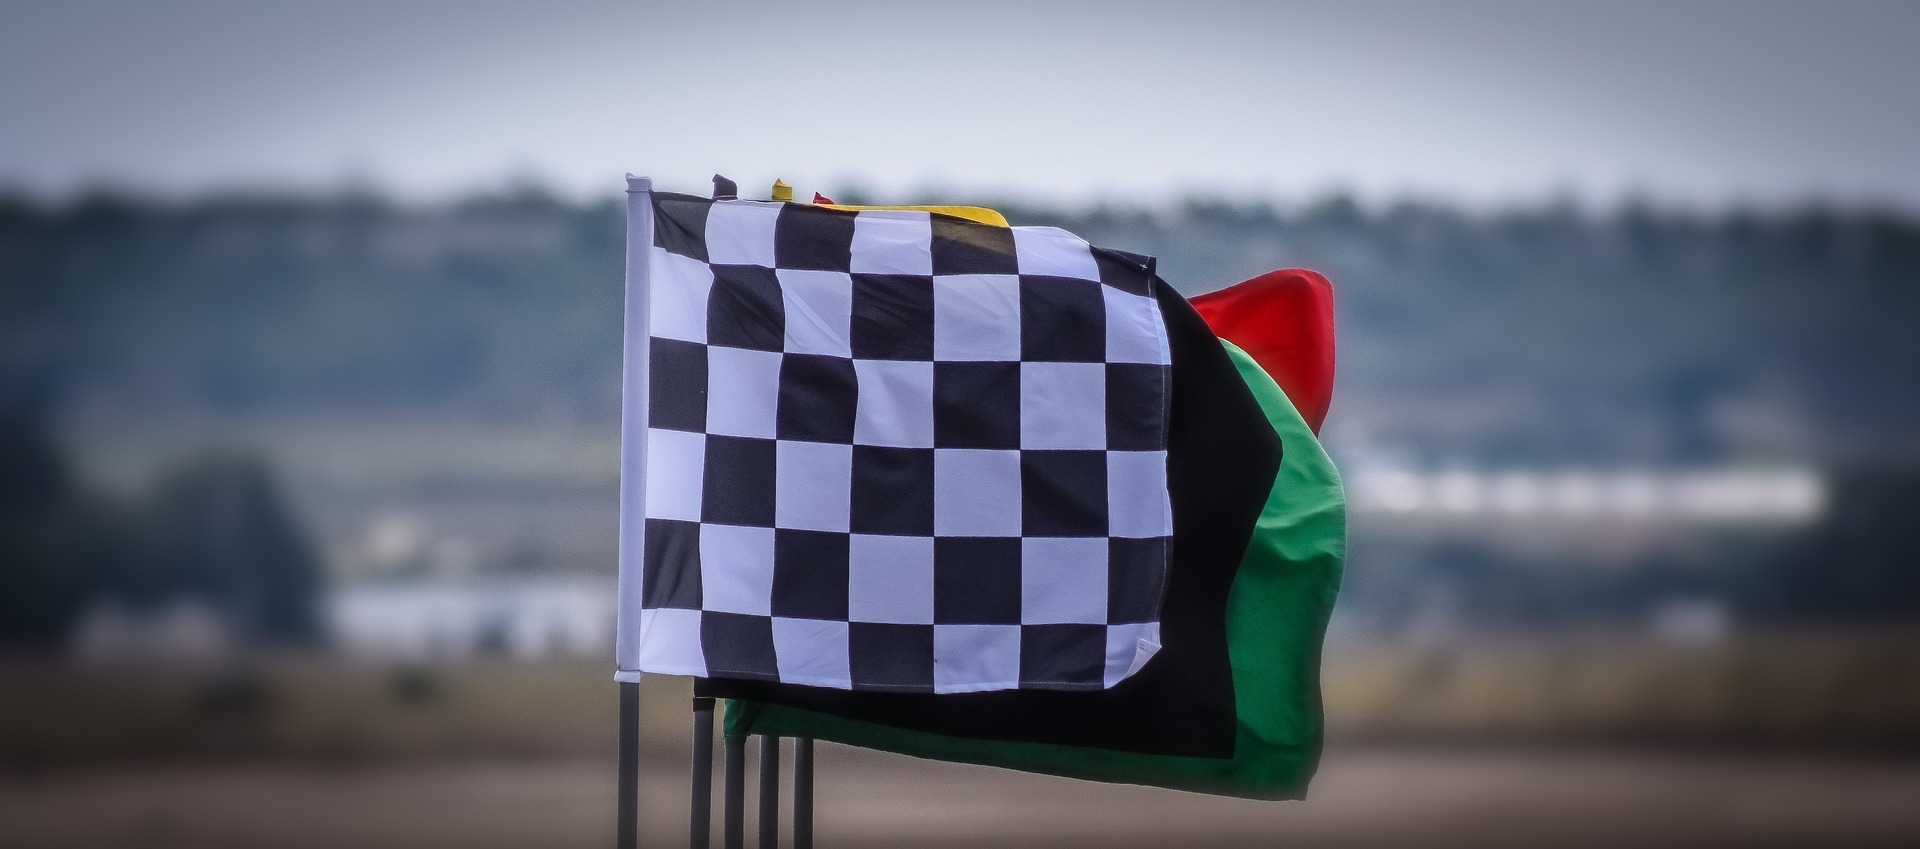 What does the checkered flag mean